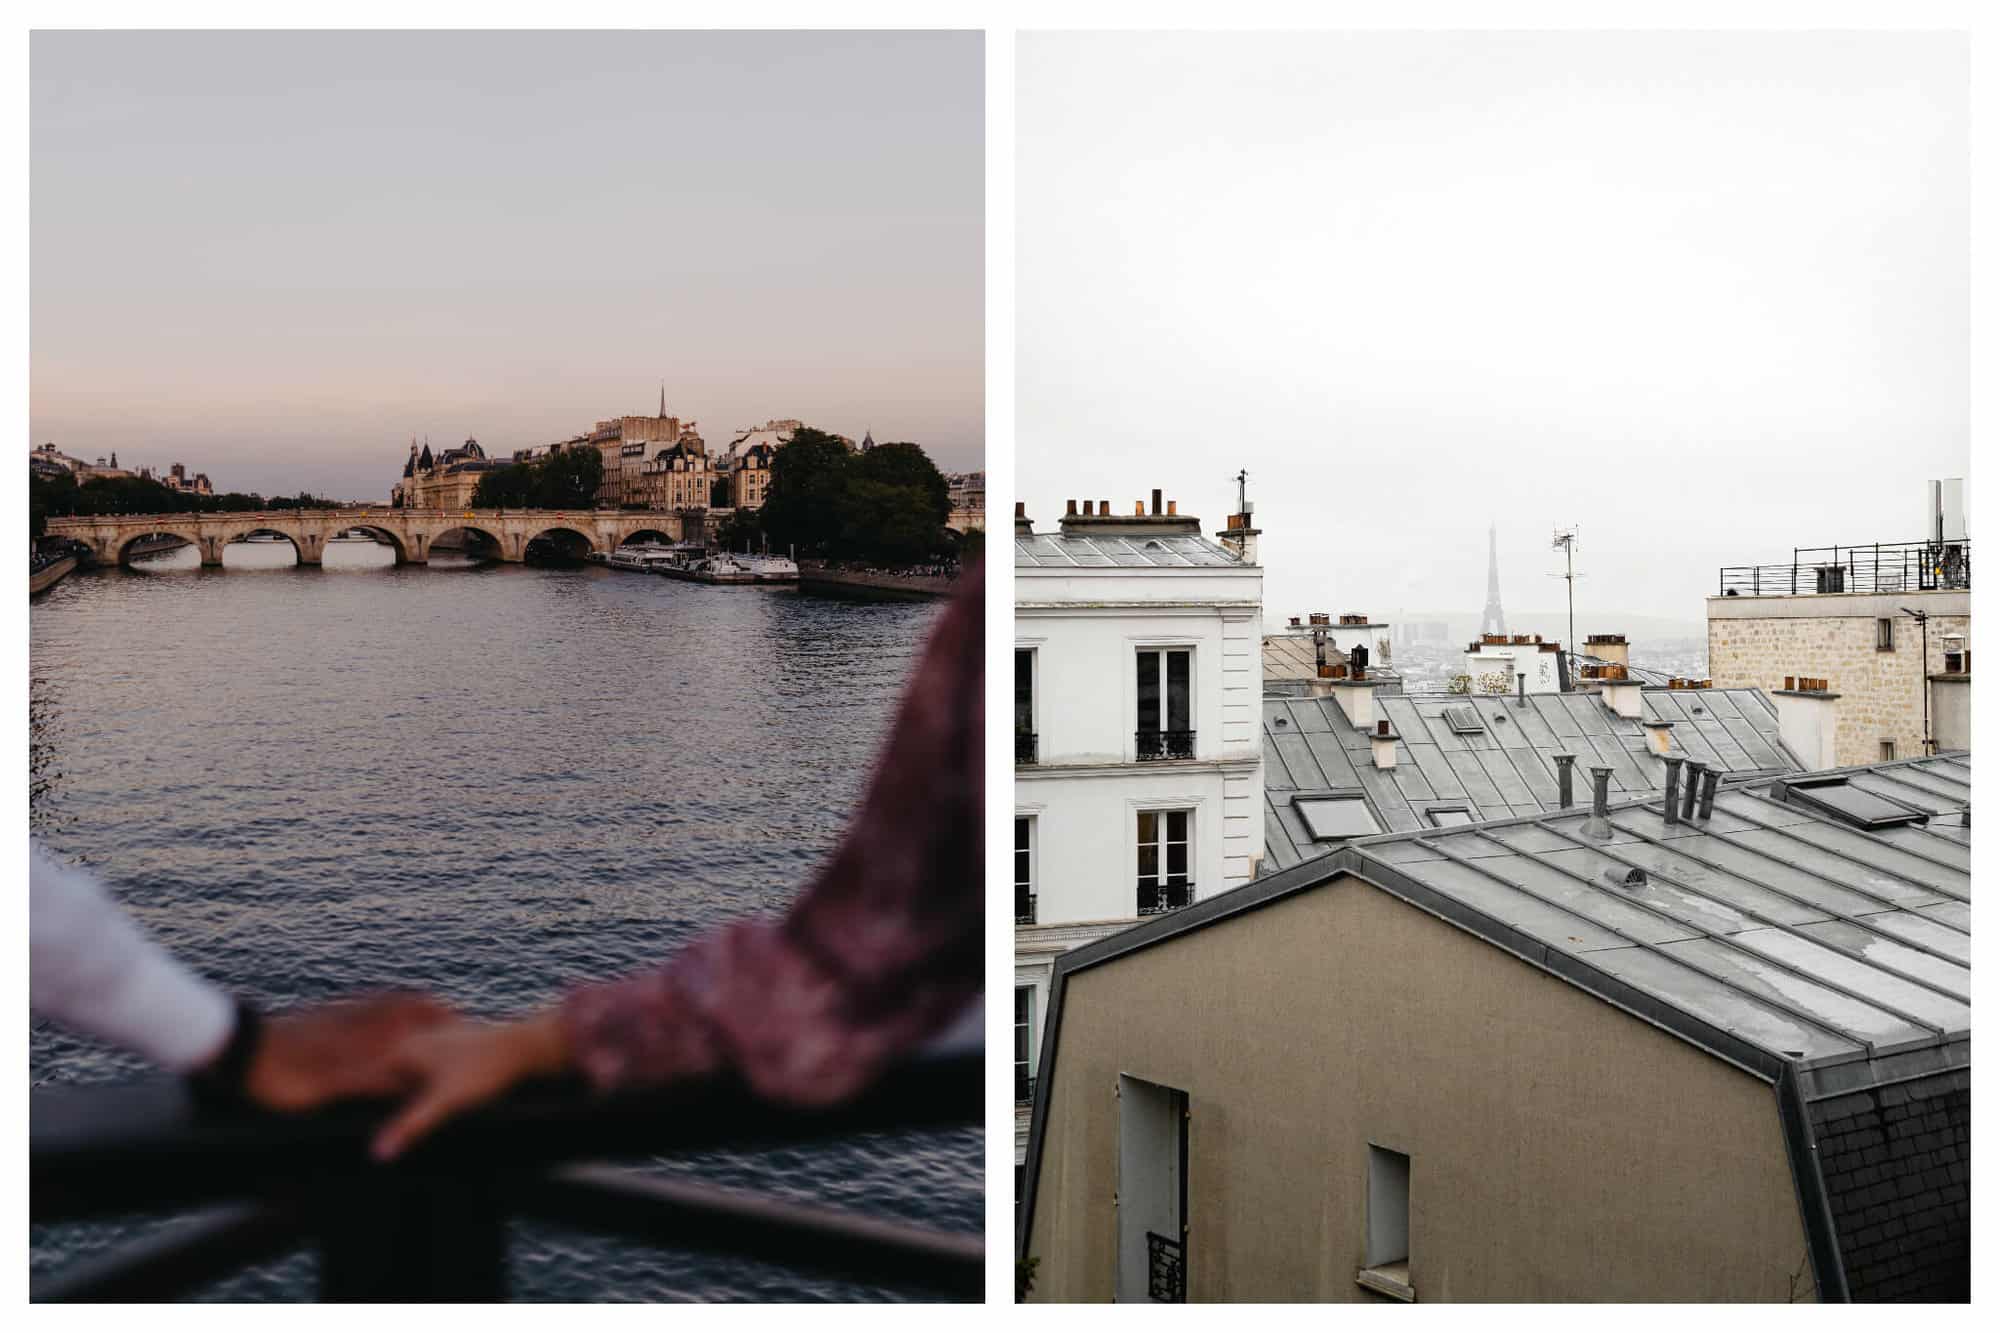 Left: A couple stands on a bridge in Paris, with their hands touching one another. There is the view of a bridge, a body of water, and various buildings in the background. Right: A photo taken from a rooftop in Paris. The Eiffel Tower is faintly visible in the background. 